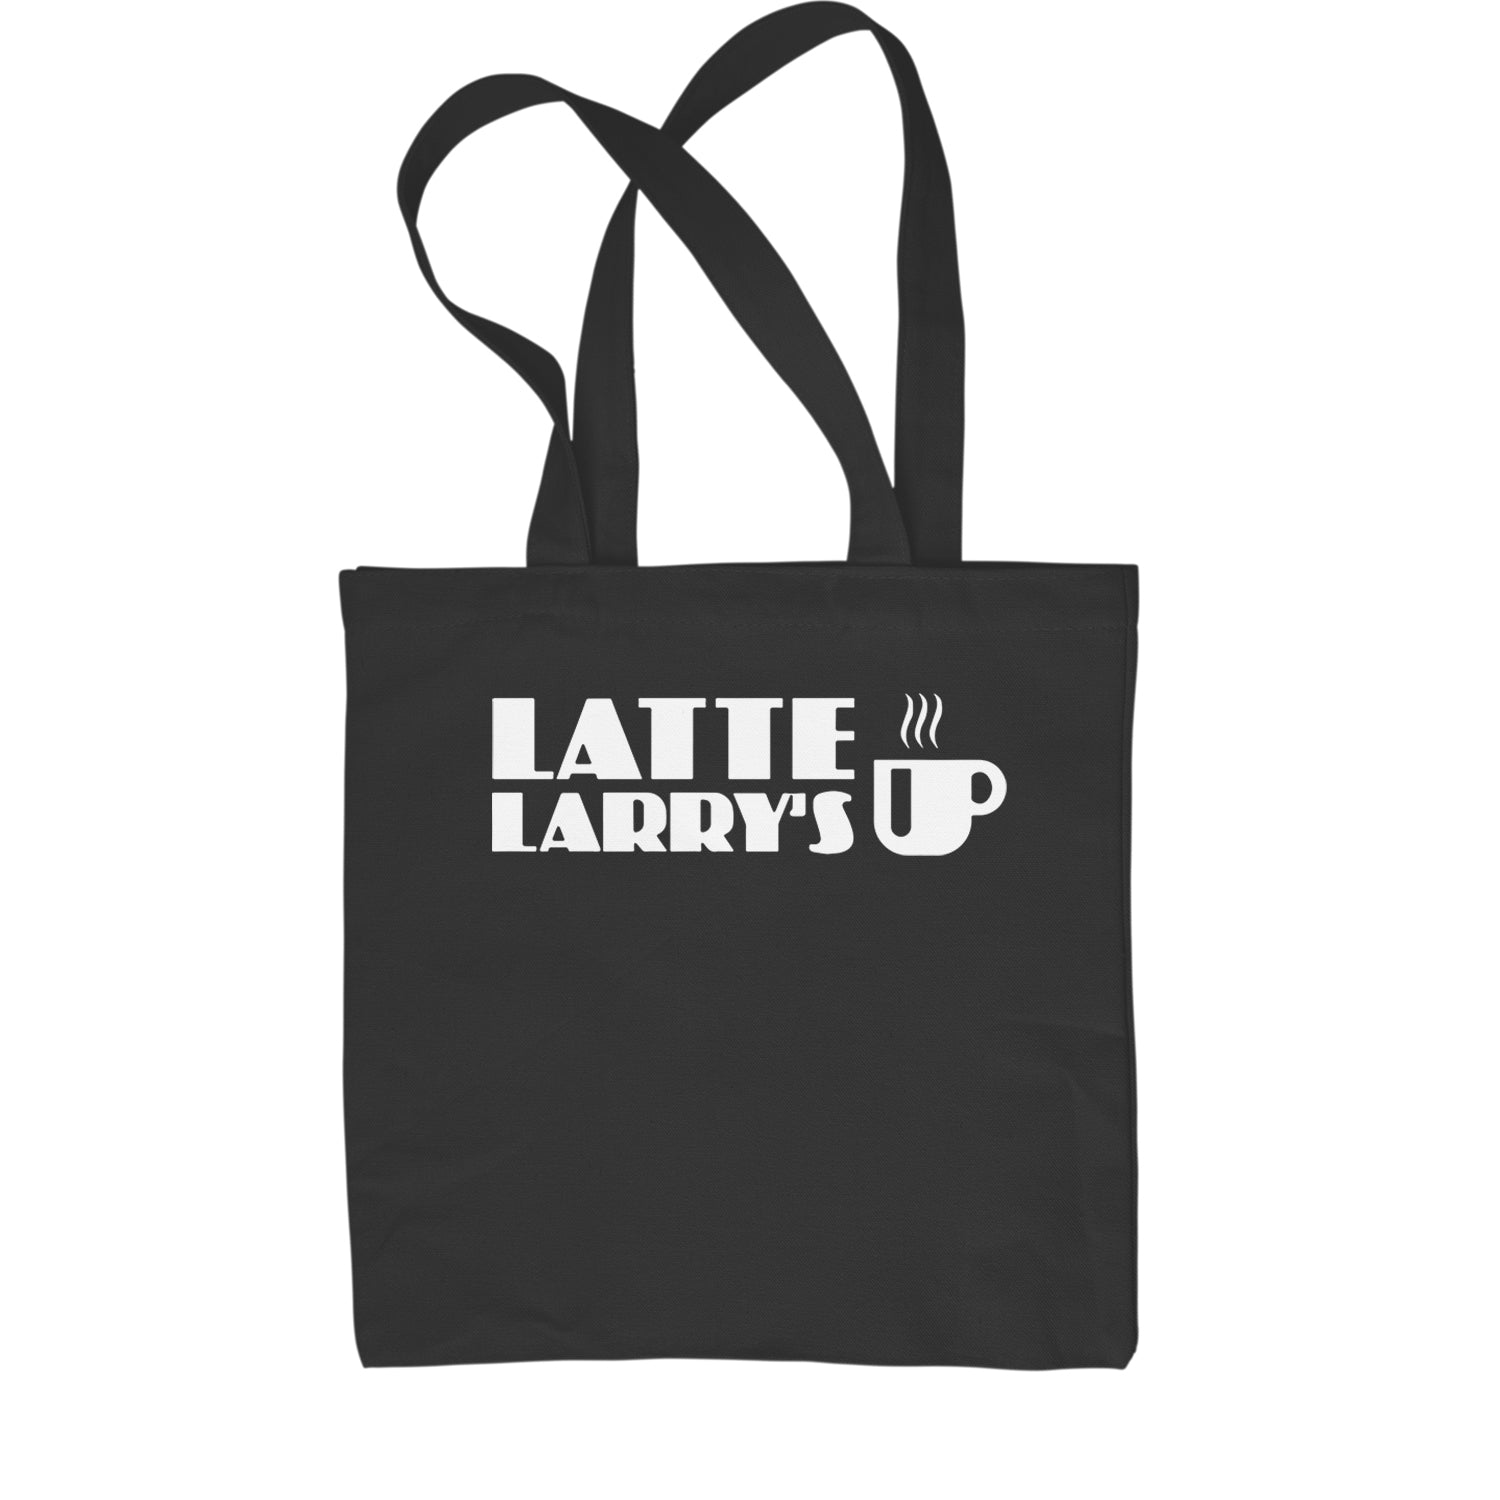 Latte Larry's Enthusiastic Coffee Shopping Tote Bag